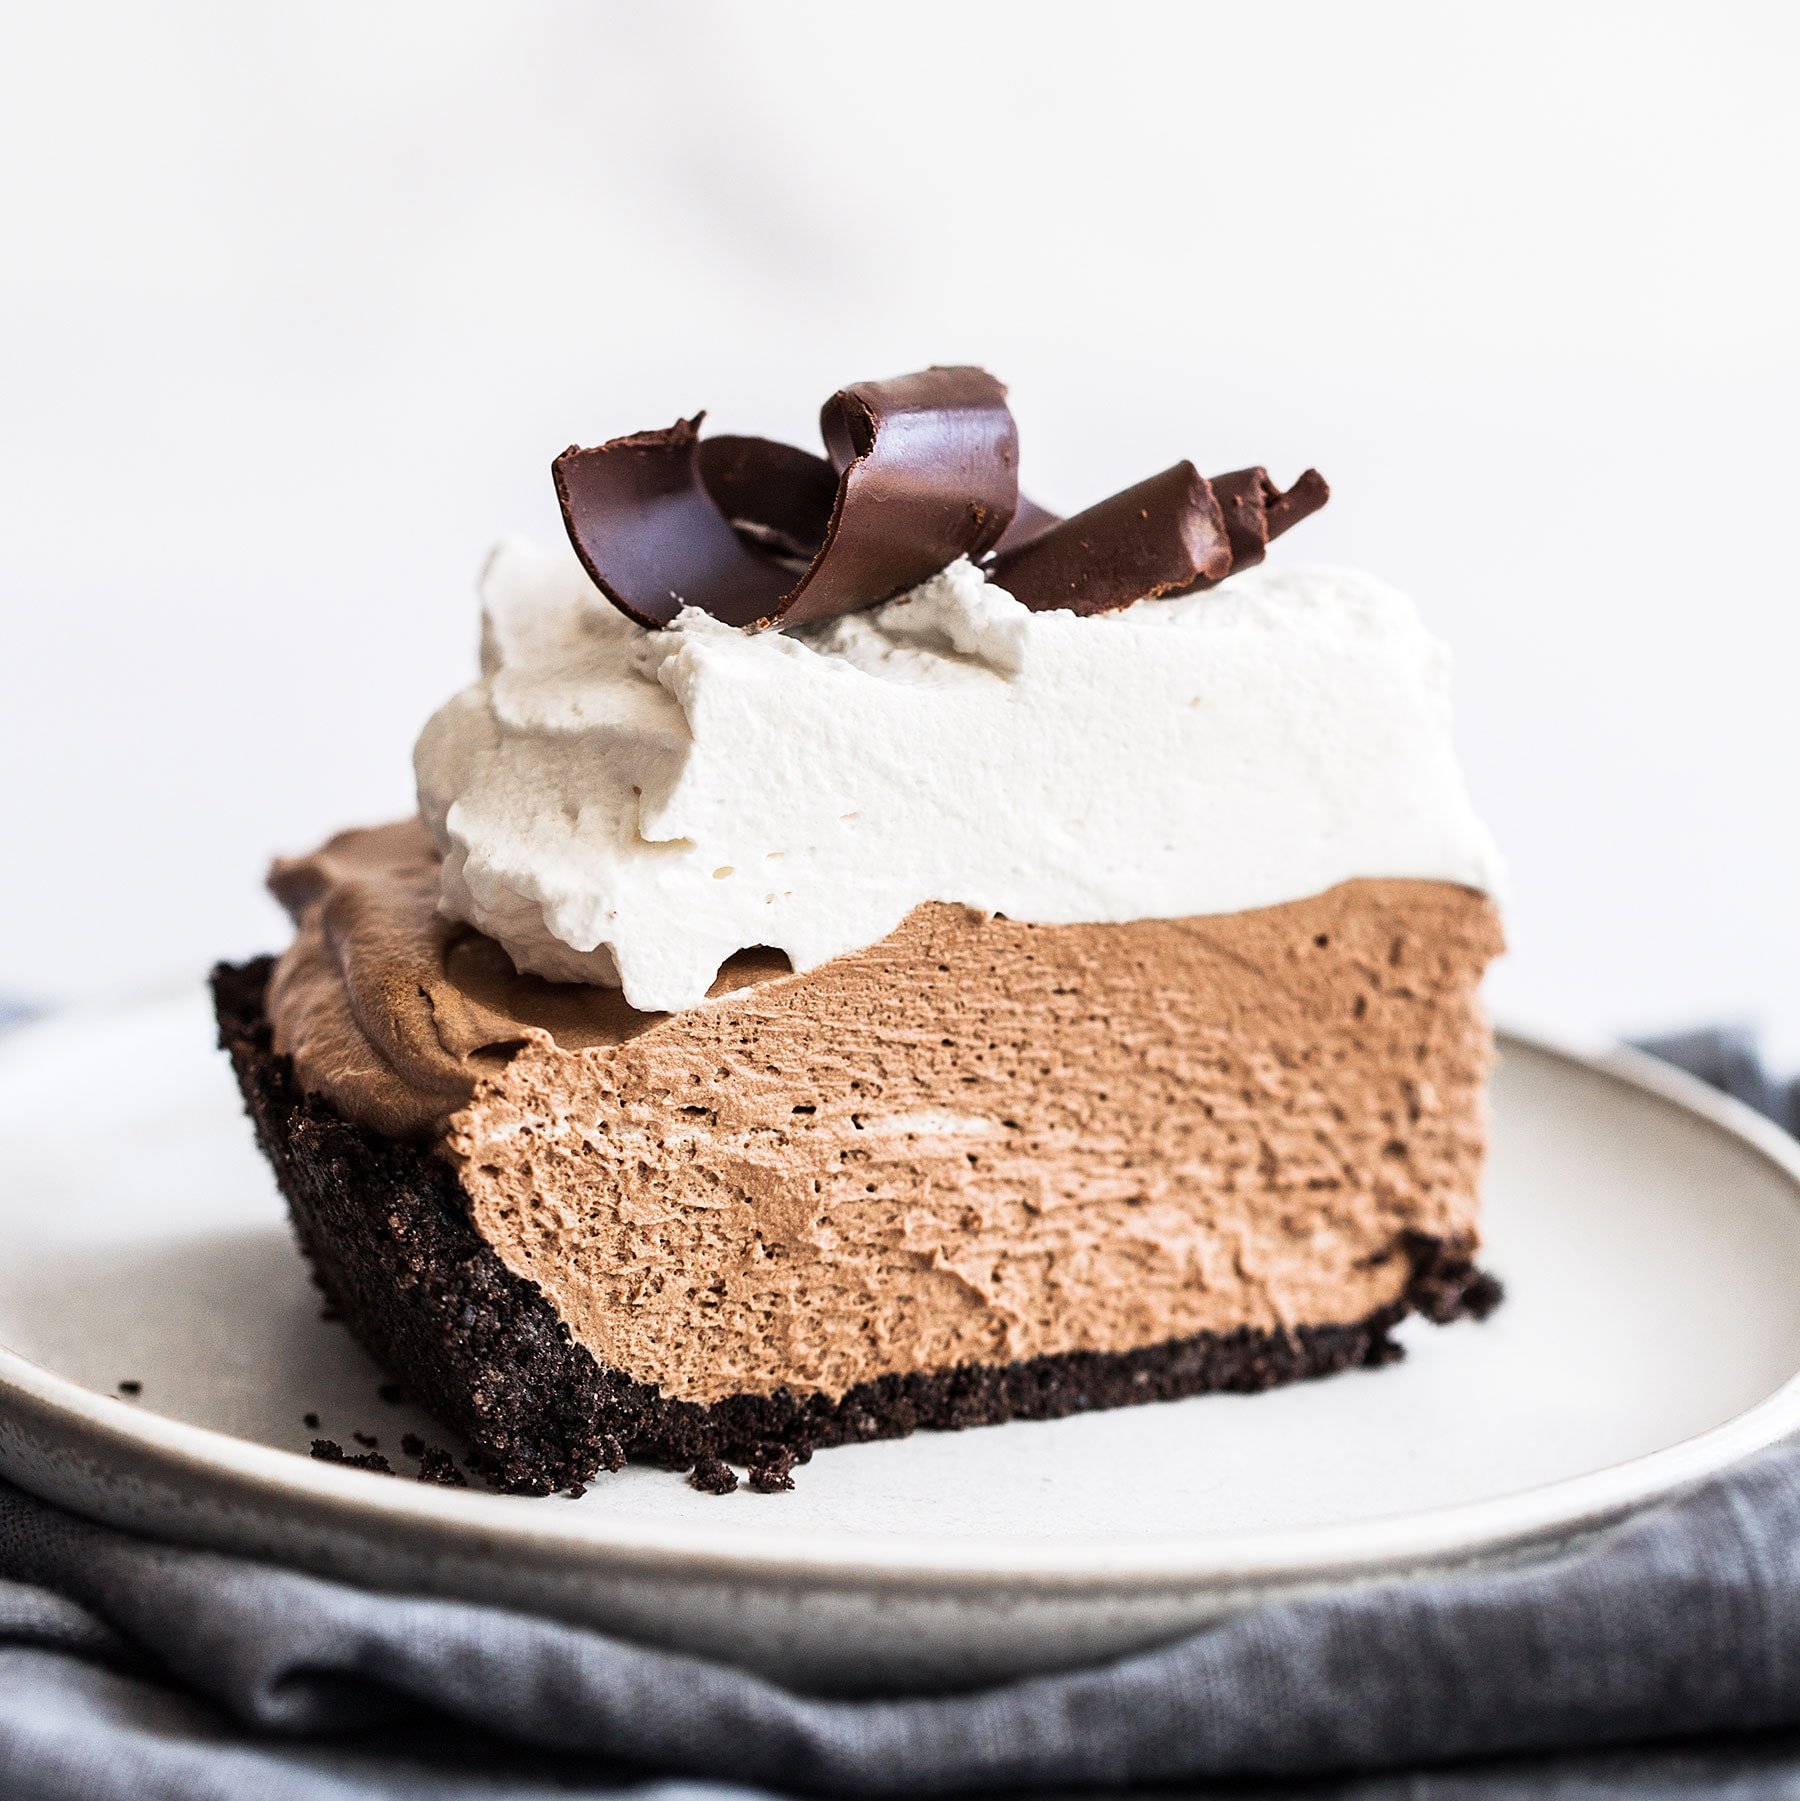 French Silk Pie features an Oreo cookie crust, rich and creamy chocolate filling, and is topped with homemade whipped cream and chocolate shavings! No raw eggs. Perfect holiday recipe!